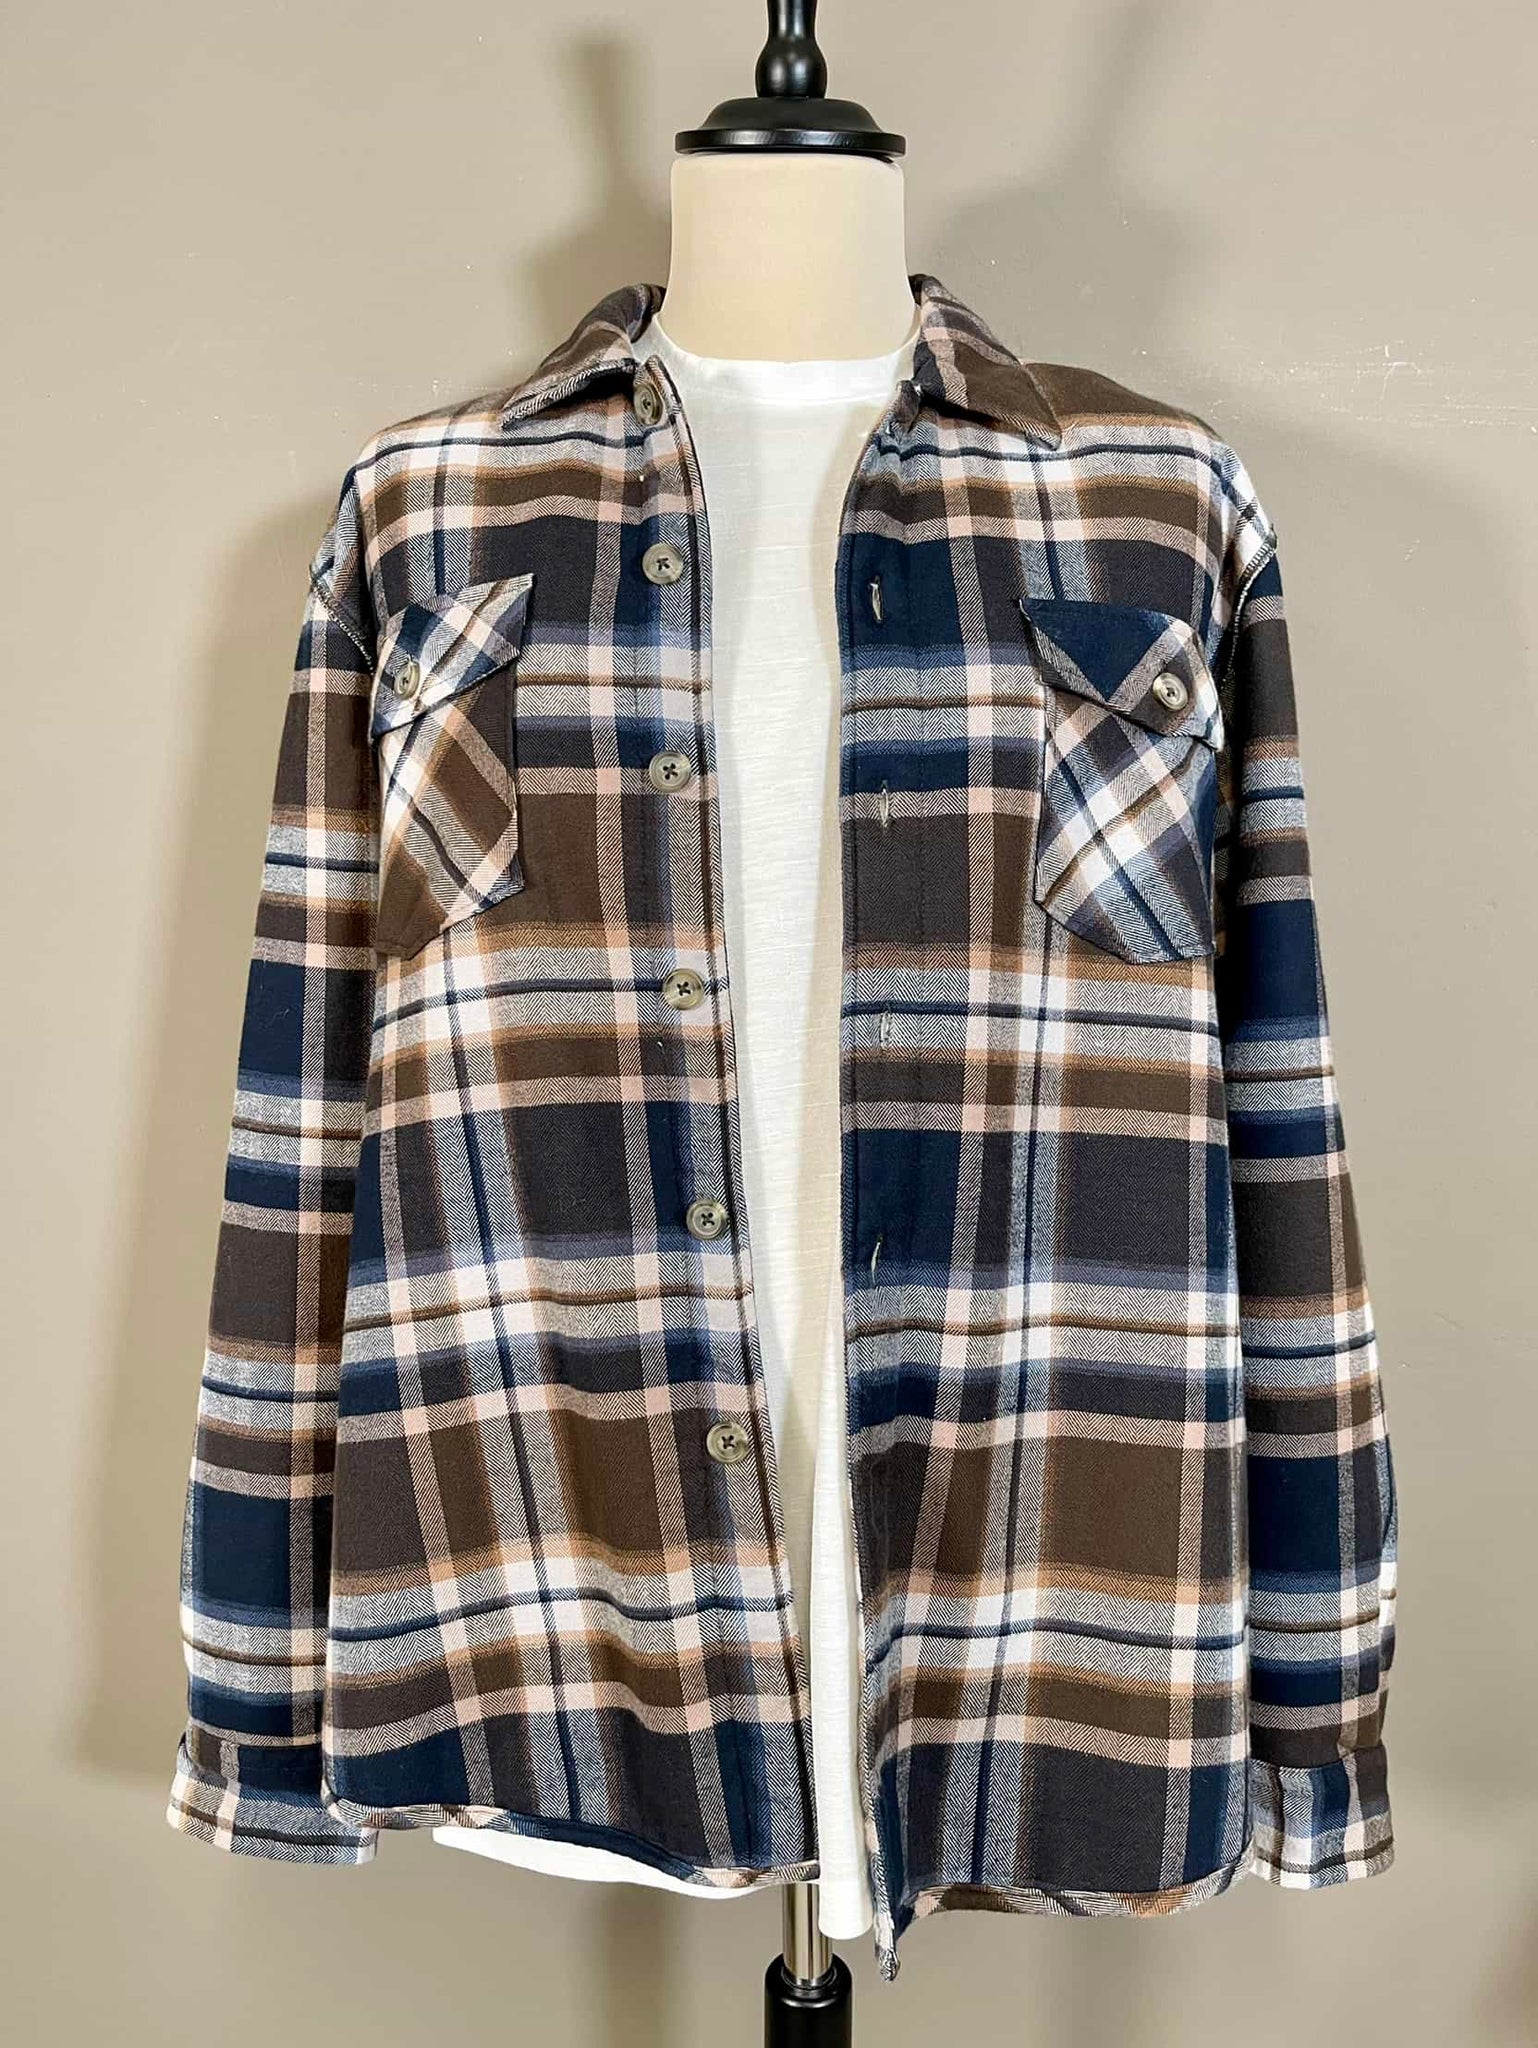 Giacca plaid coat - Why Not Brand